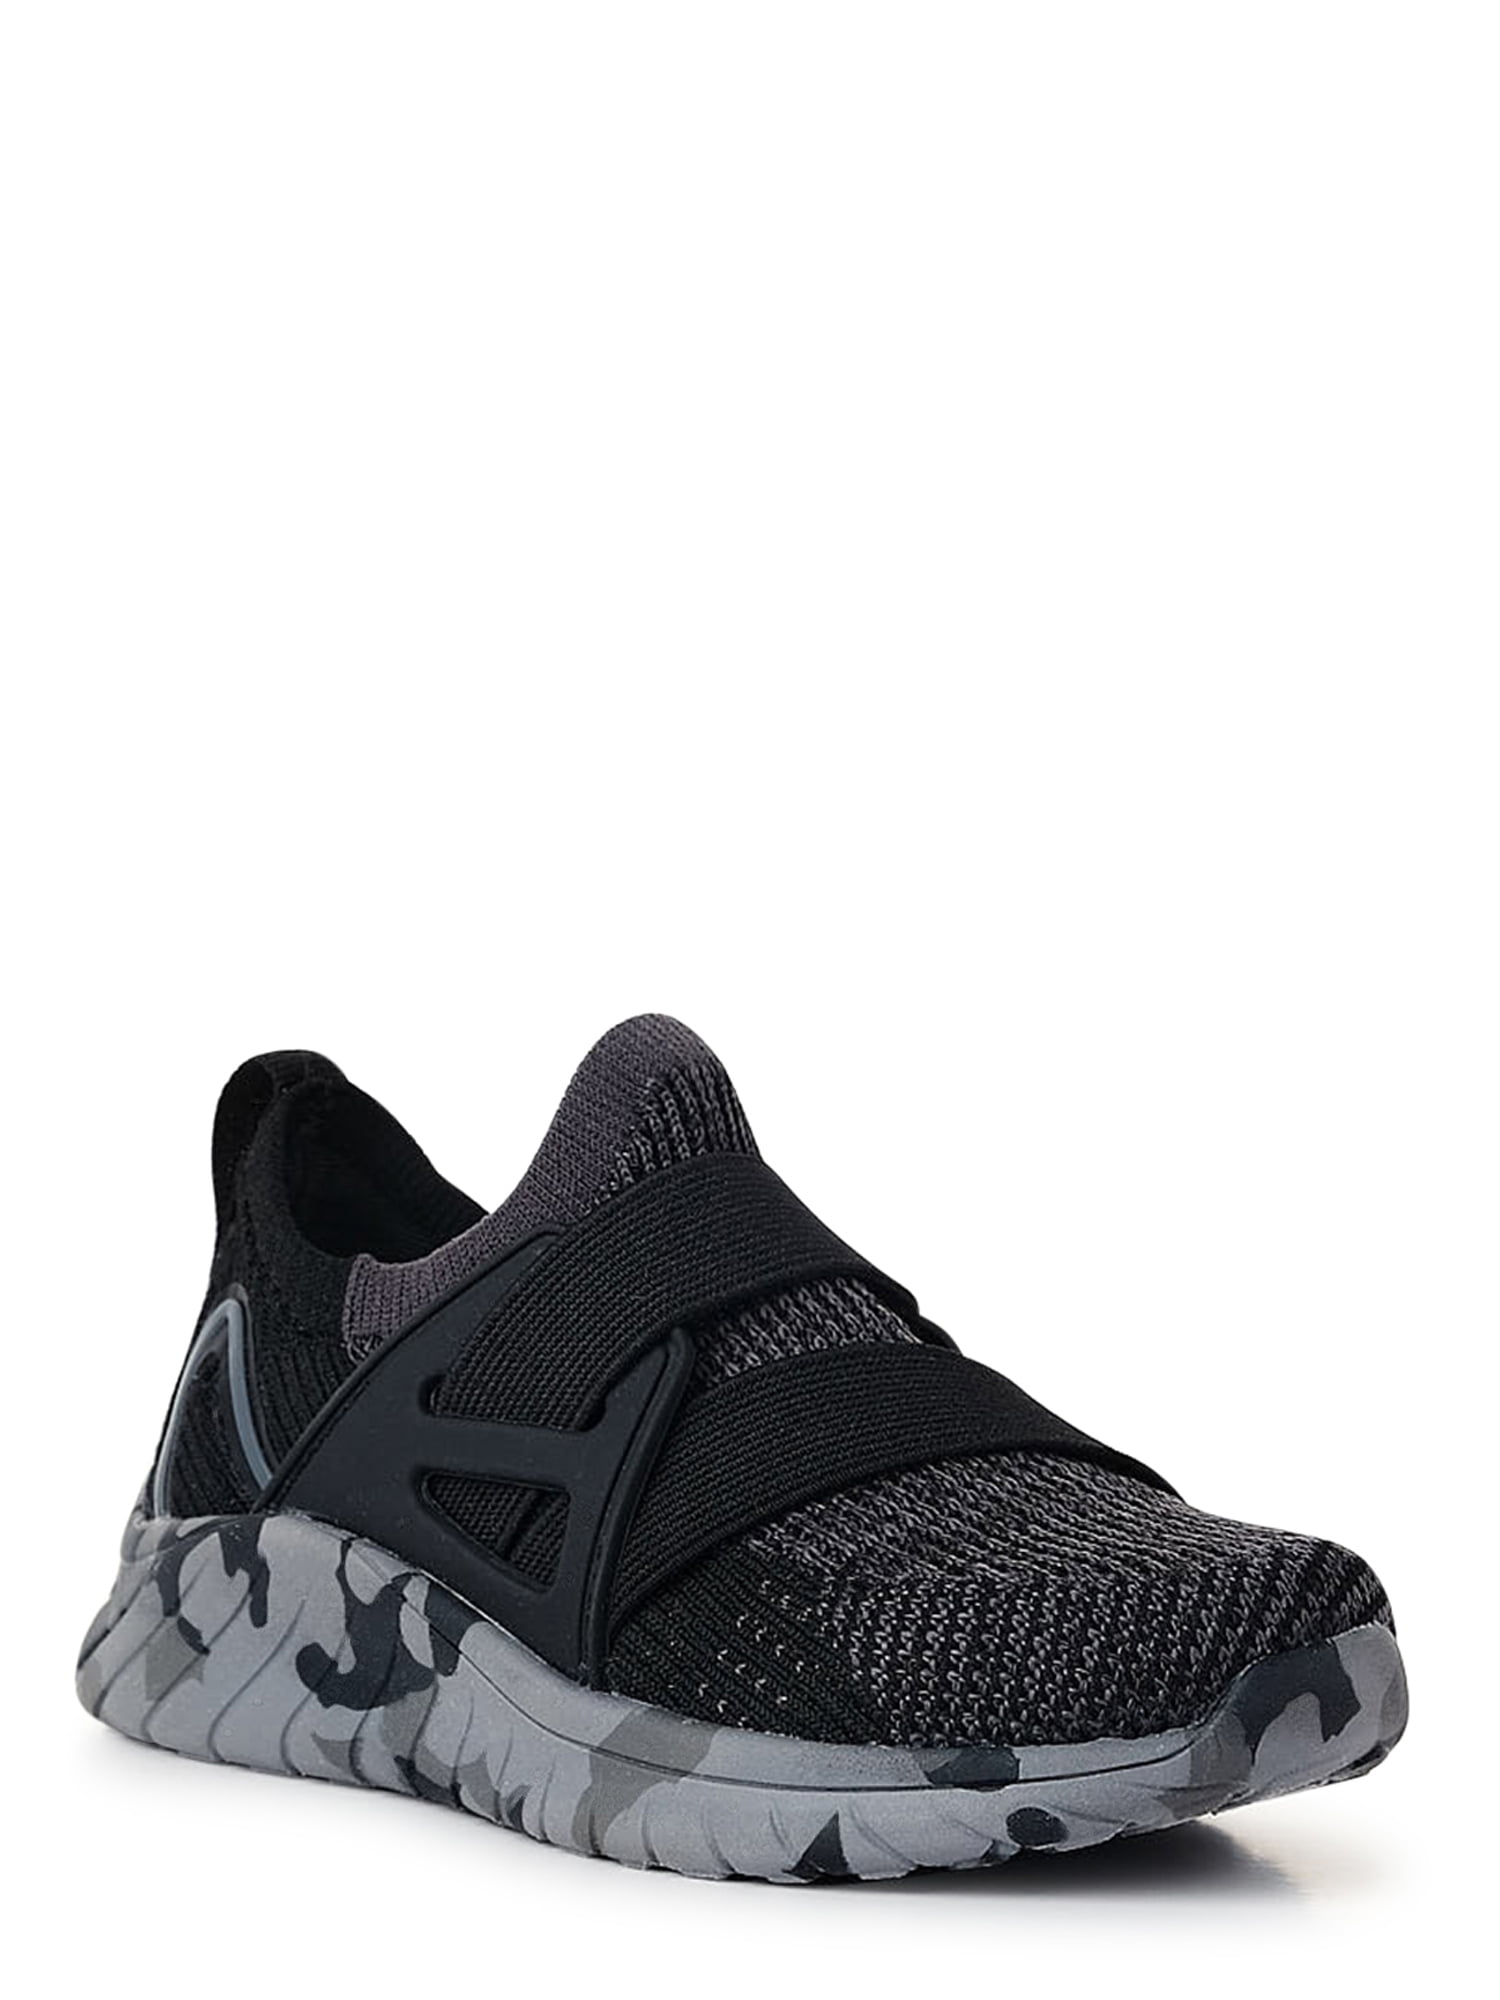 Athletic Works Toddler Boys Knit Cage Athletic Sneakers, Sizes 7-12